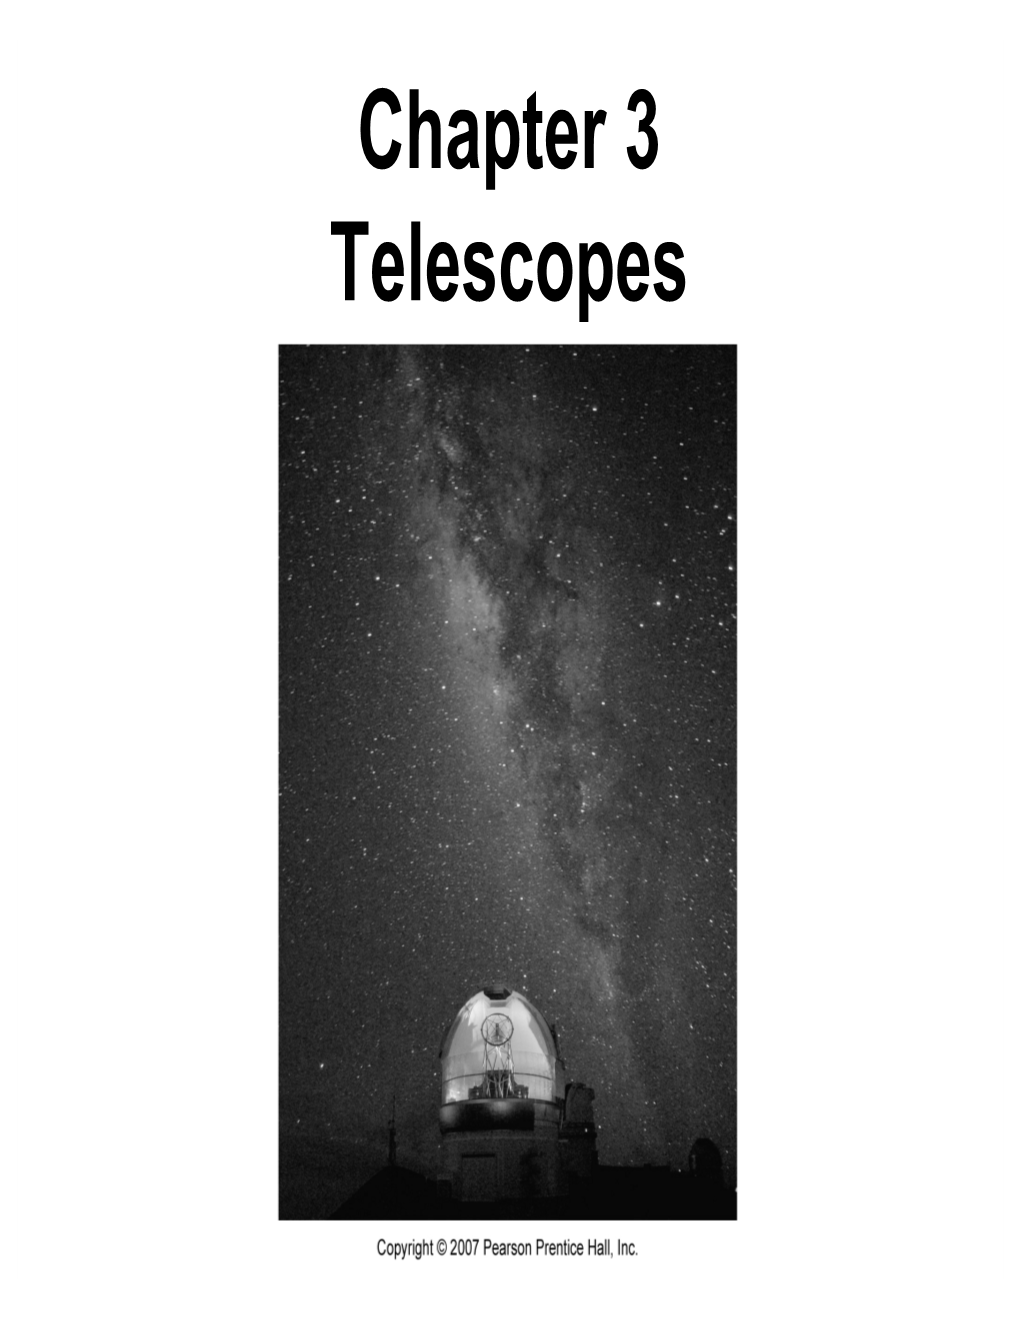 Chapter 3 Telescopes Units of Chapter 3